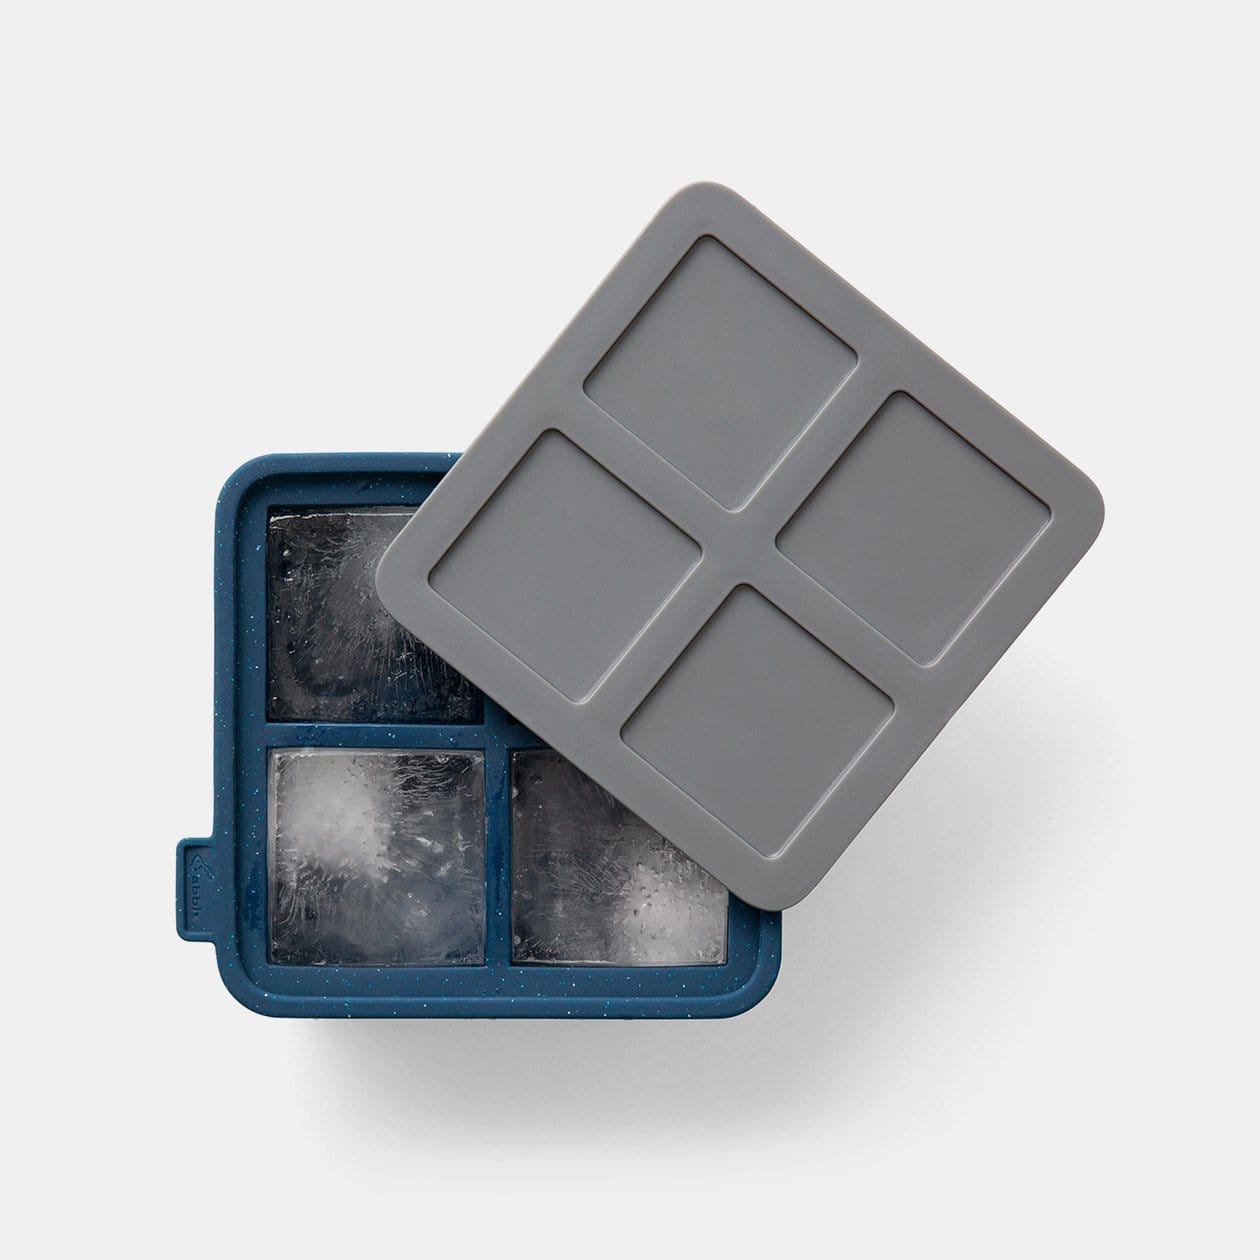 Silicone Mold: Ice Cube